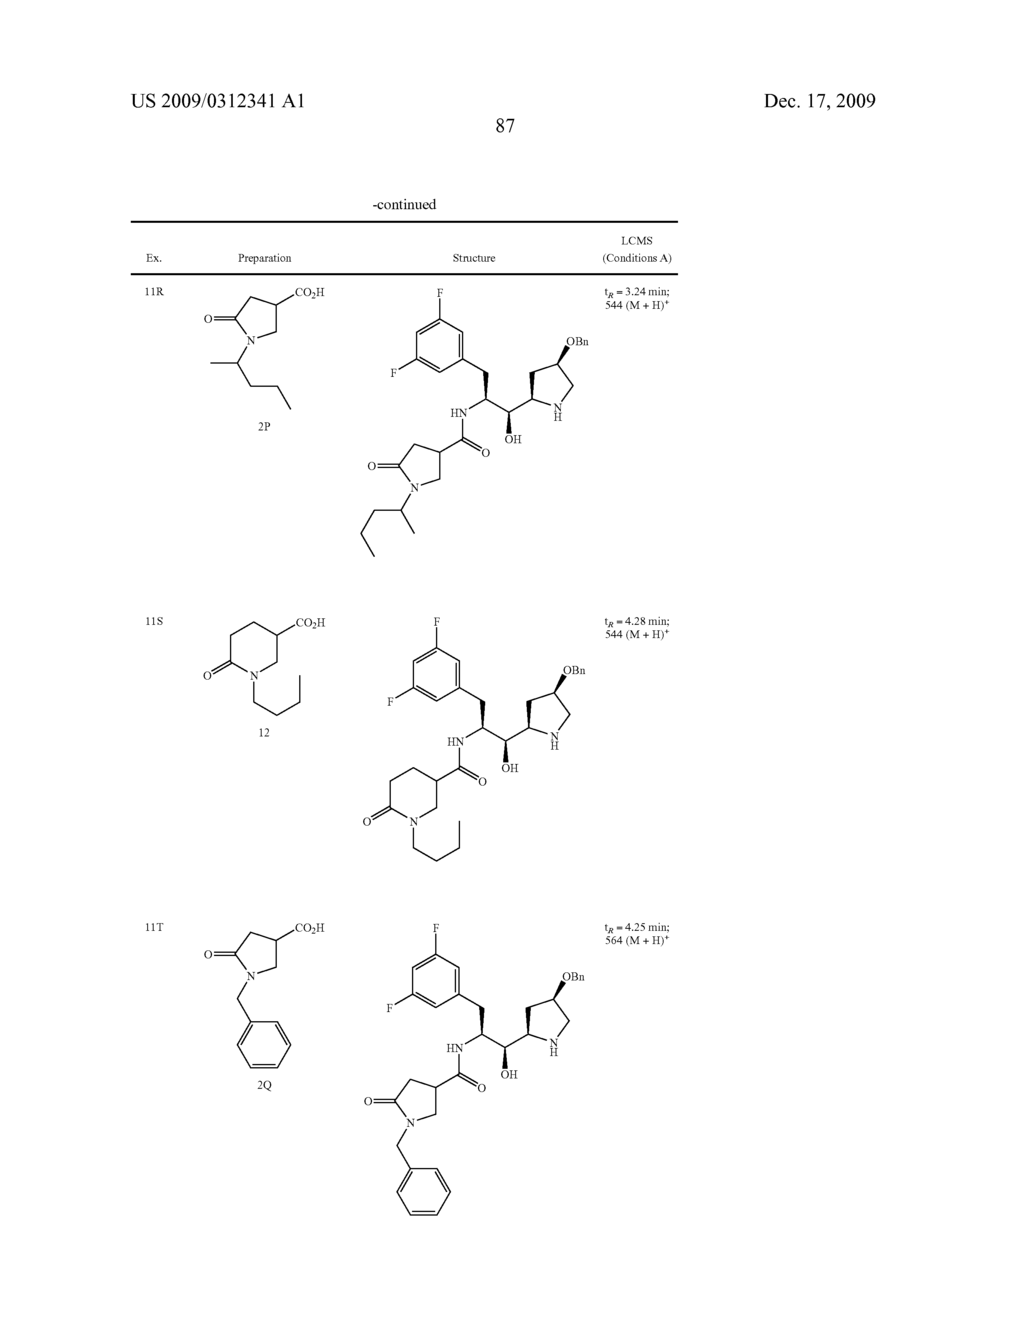 CYCLIC AMINE BACE-1 INHIBITORS HAVING A HETEROCYCLIC SUBSTITUENT - diagram, schematic, and image 88